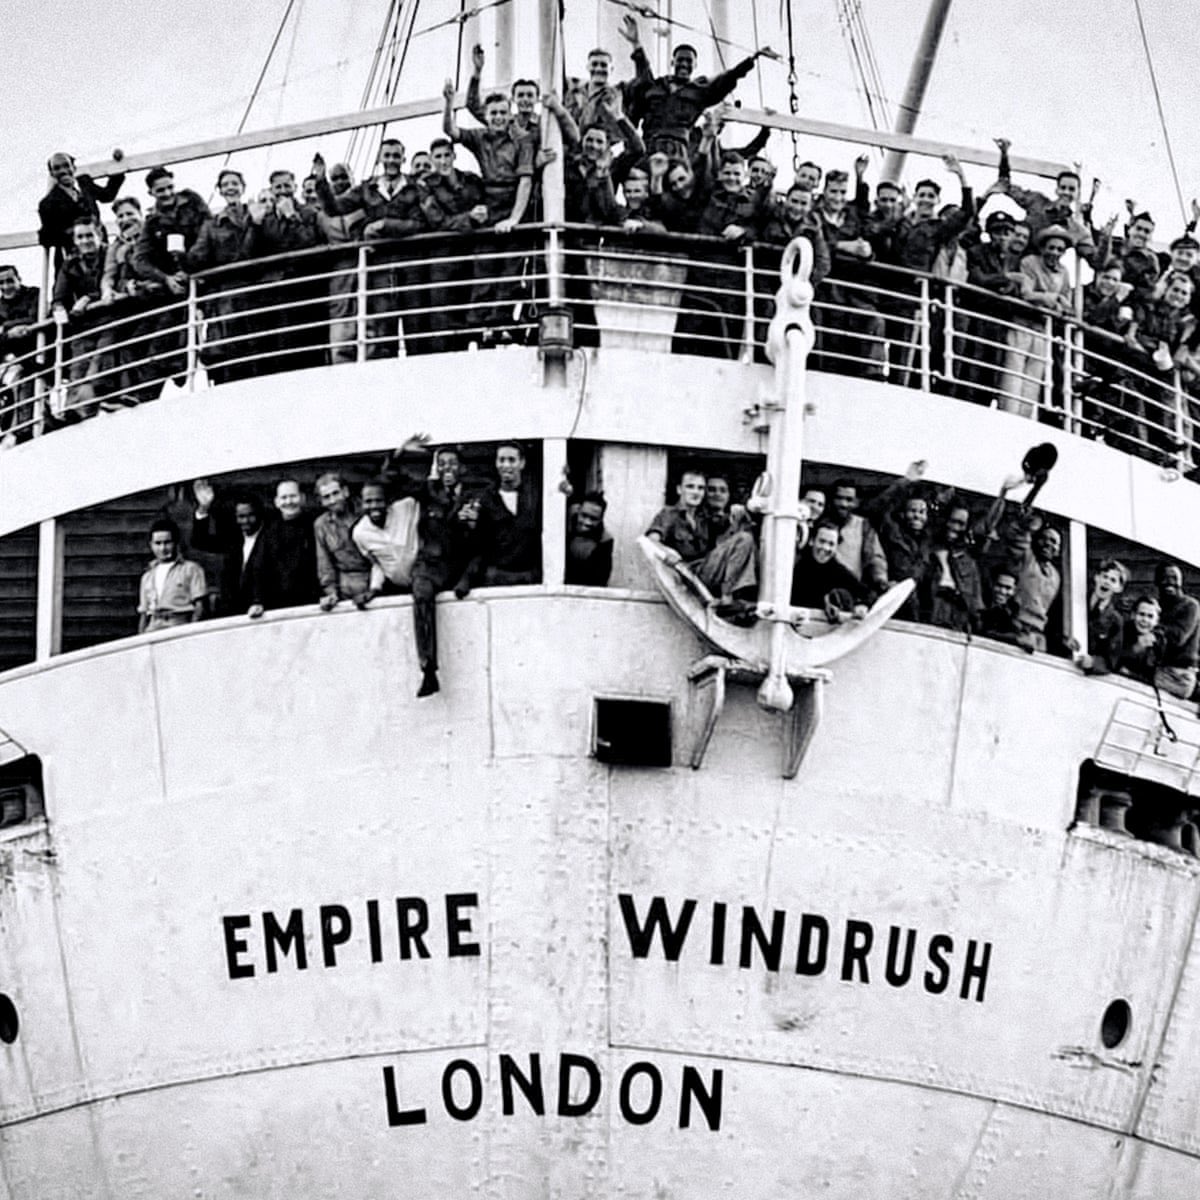 The Windrush scandal. British citizens being wrongly deported, detained and denied their rights. A perfecr example of the hostile, xenophobic and institutionally racist environment that Brexit has fostered.